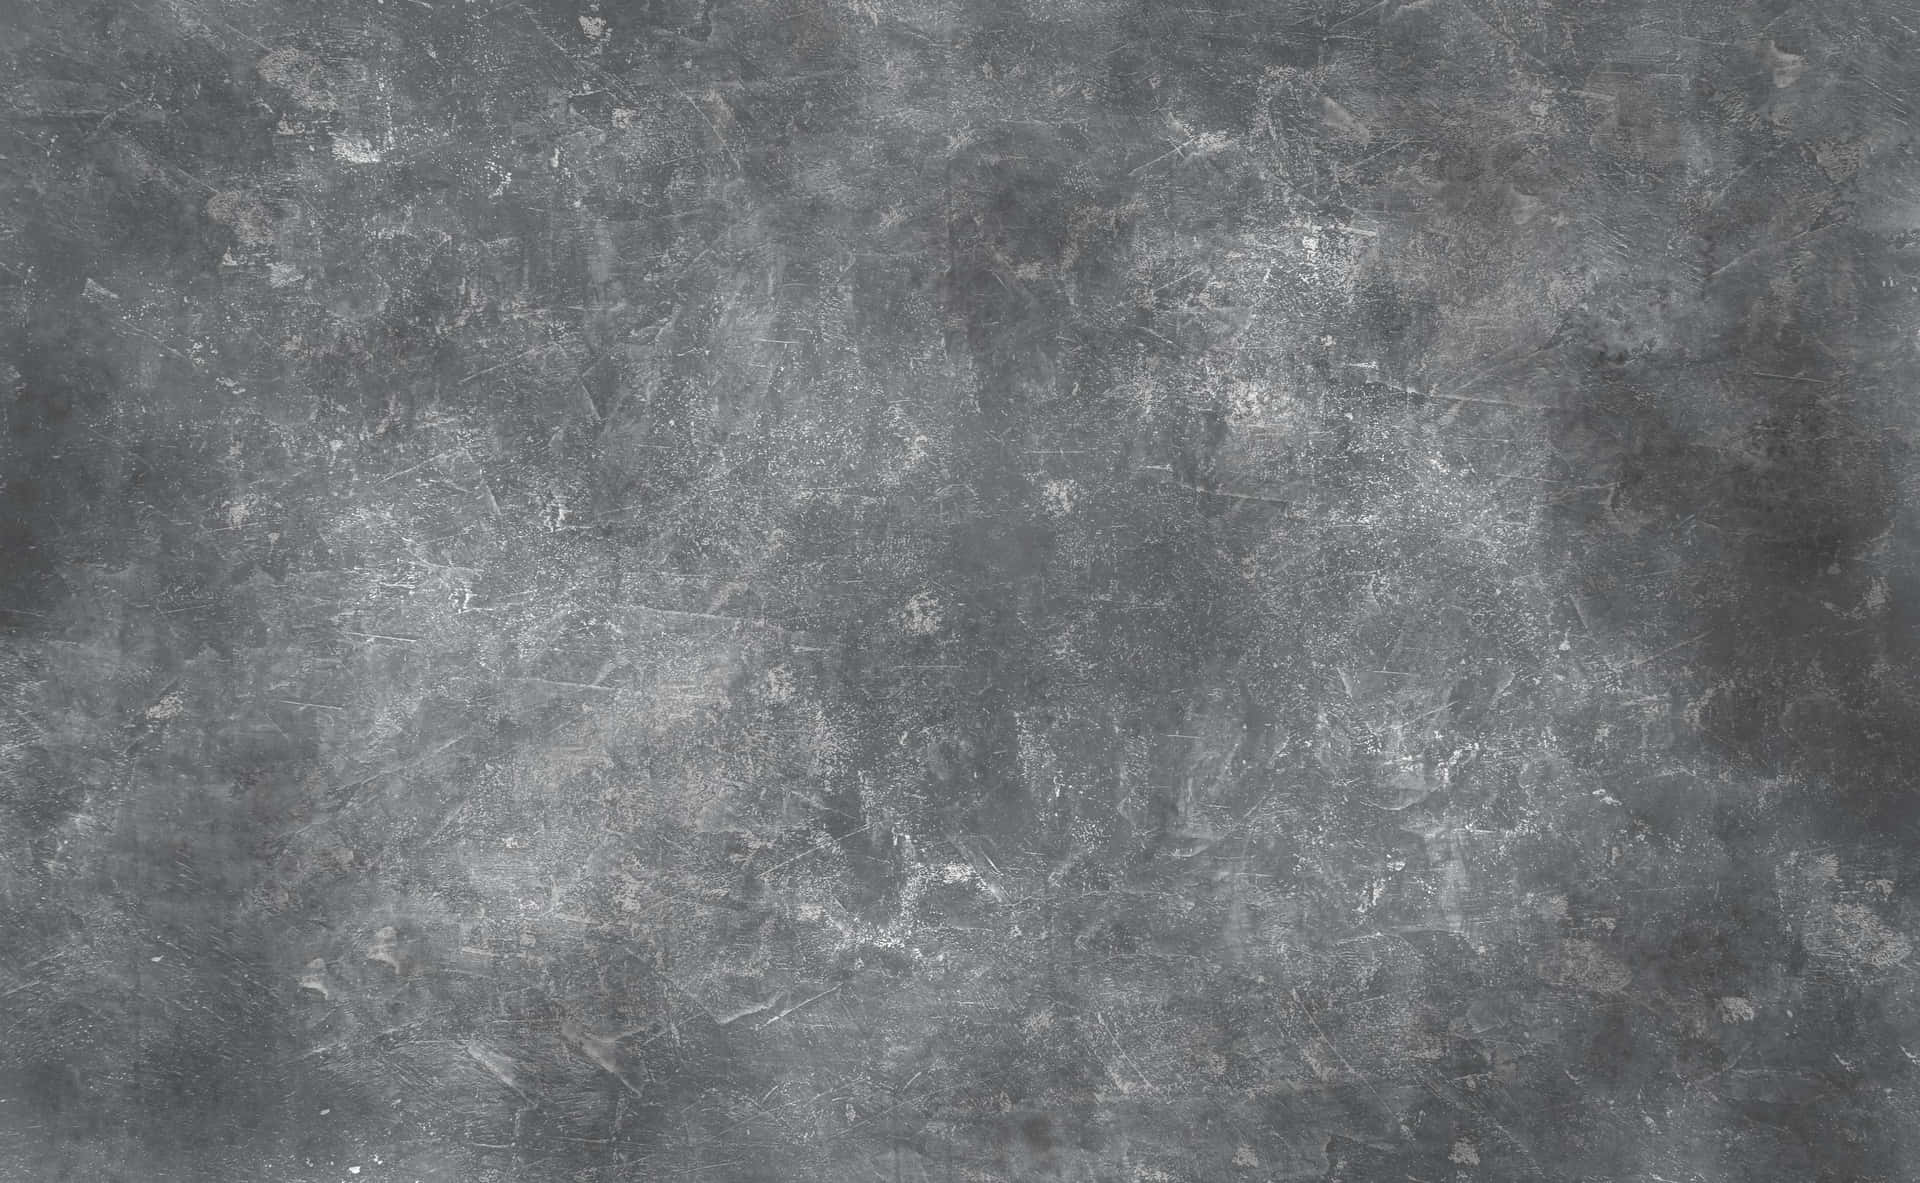 Enjoy the calming sense of grey with this elegant aesthetic background